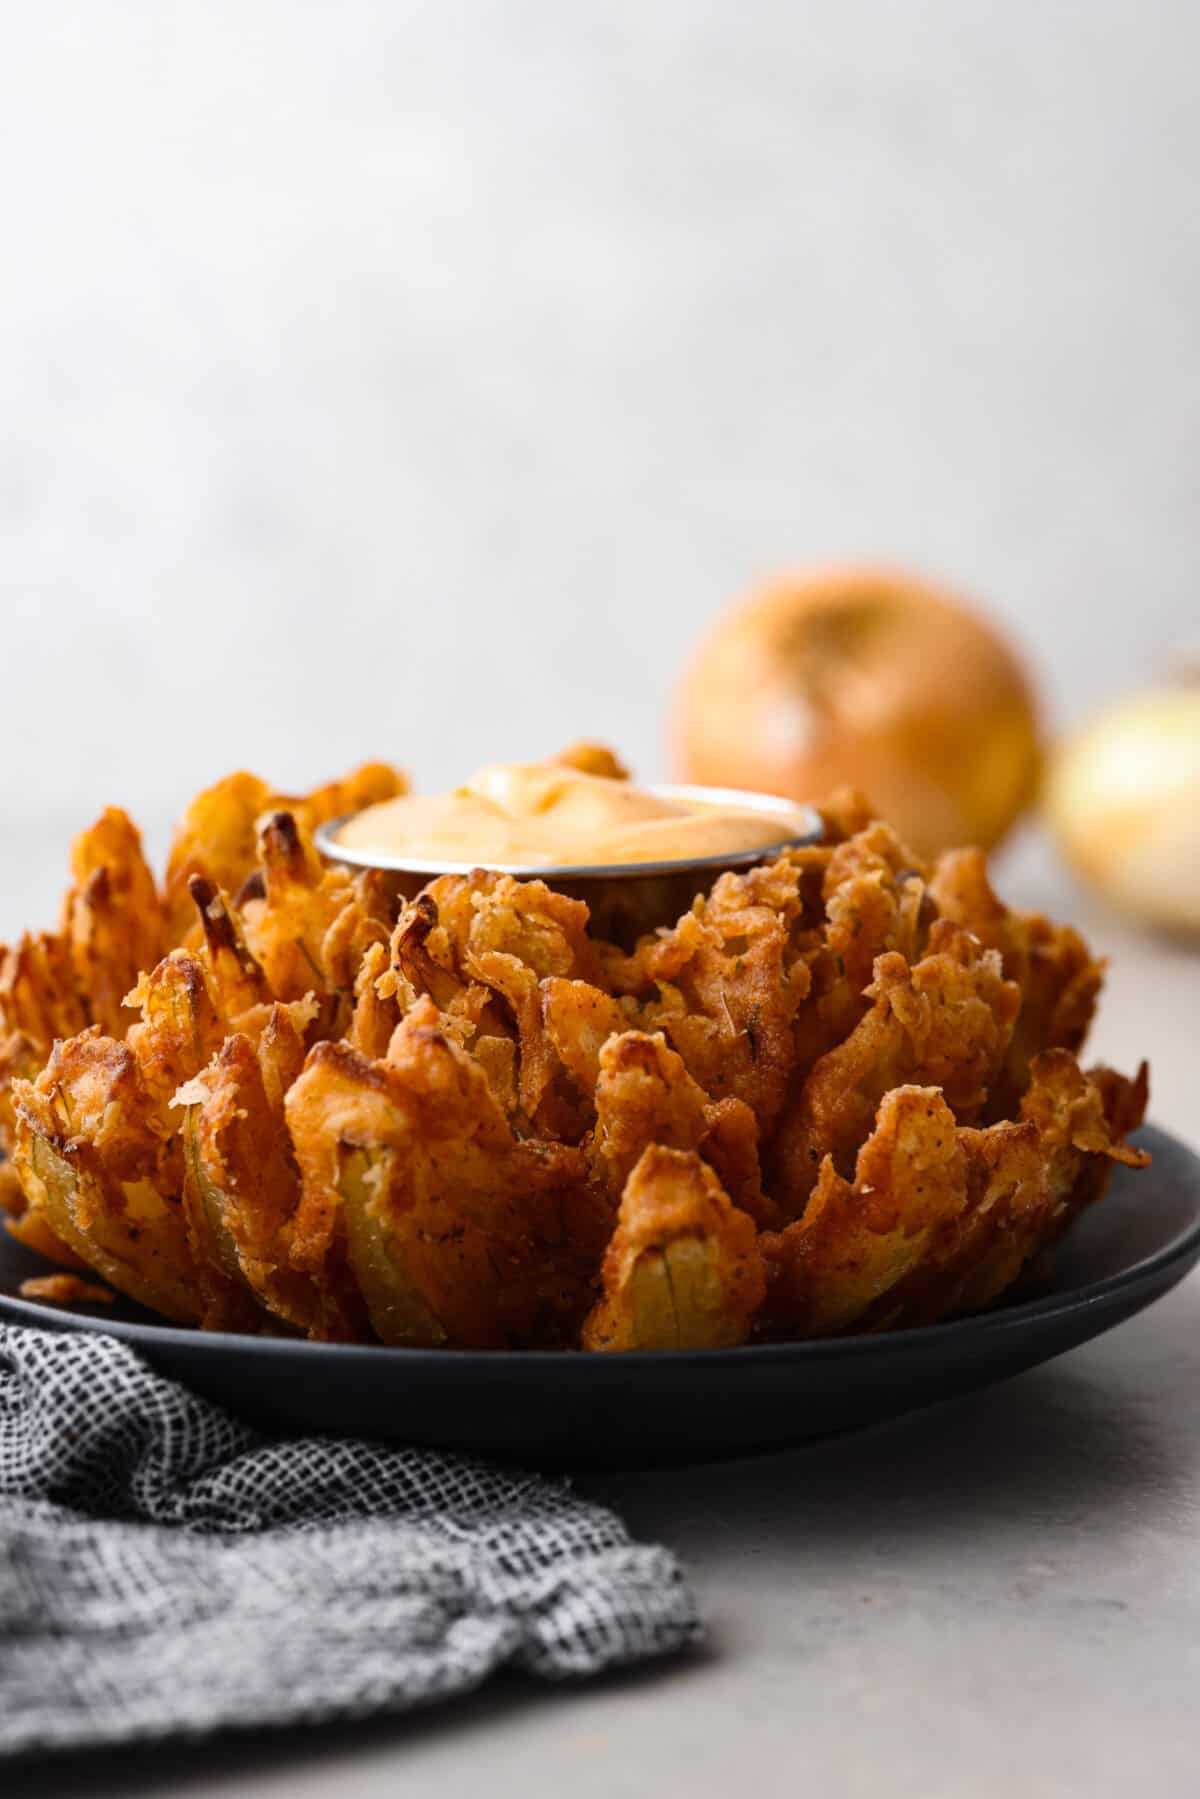 A bloomin onion served with a creamy dipping sauce.